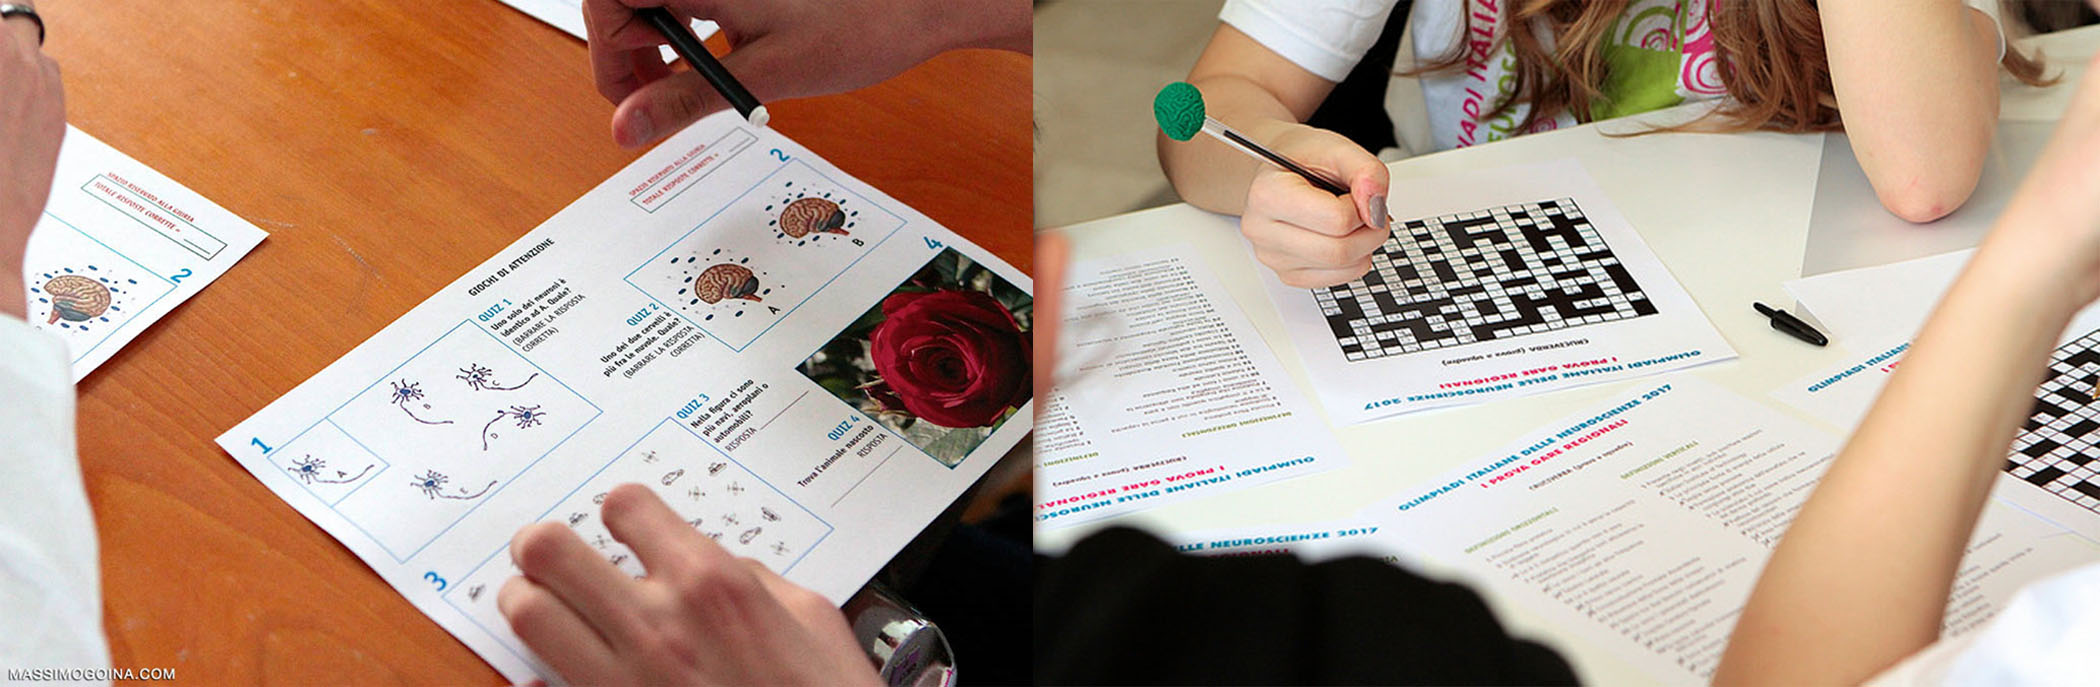 Closeups of students working on crossword puzzles